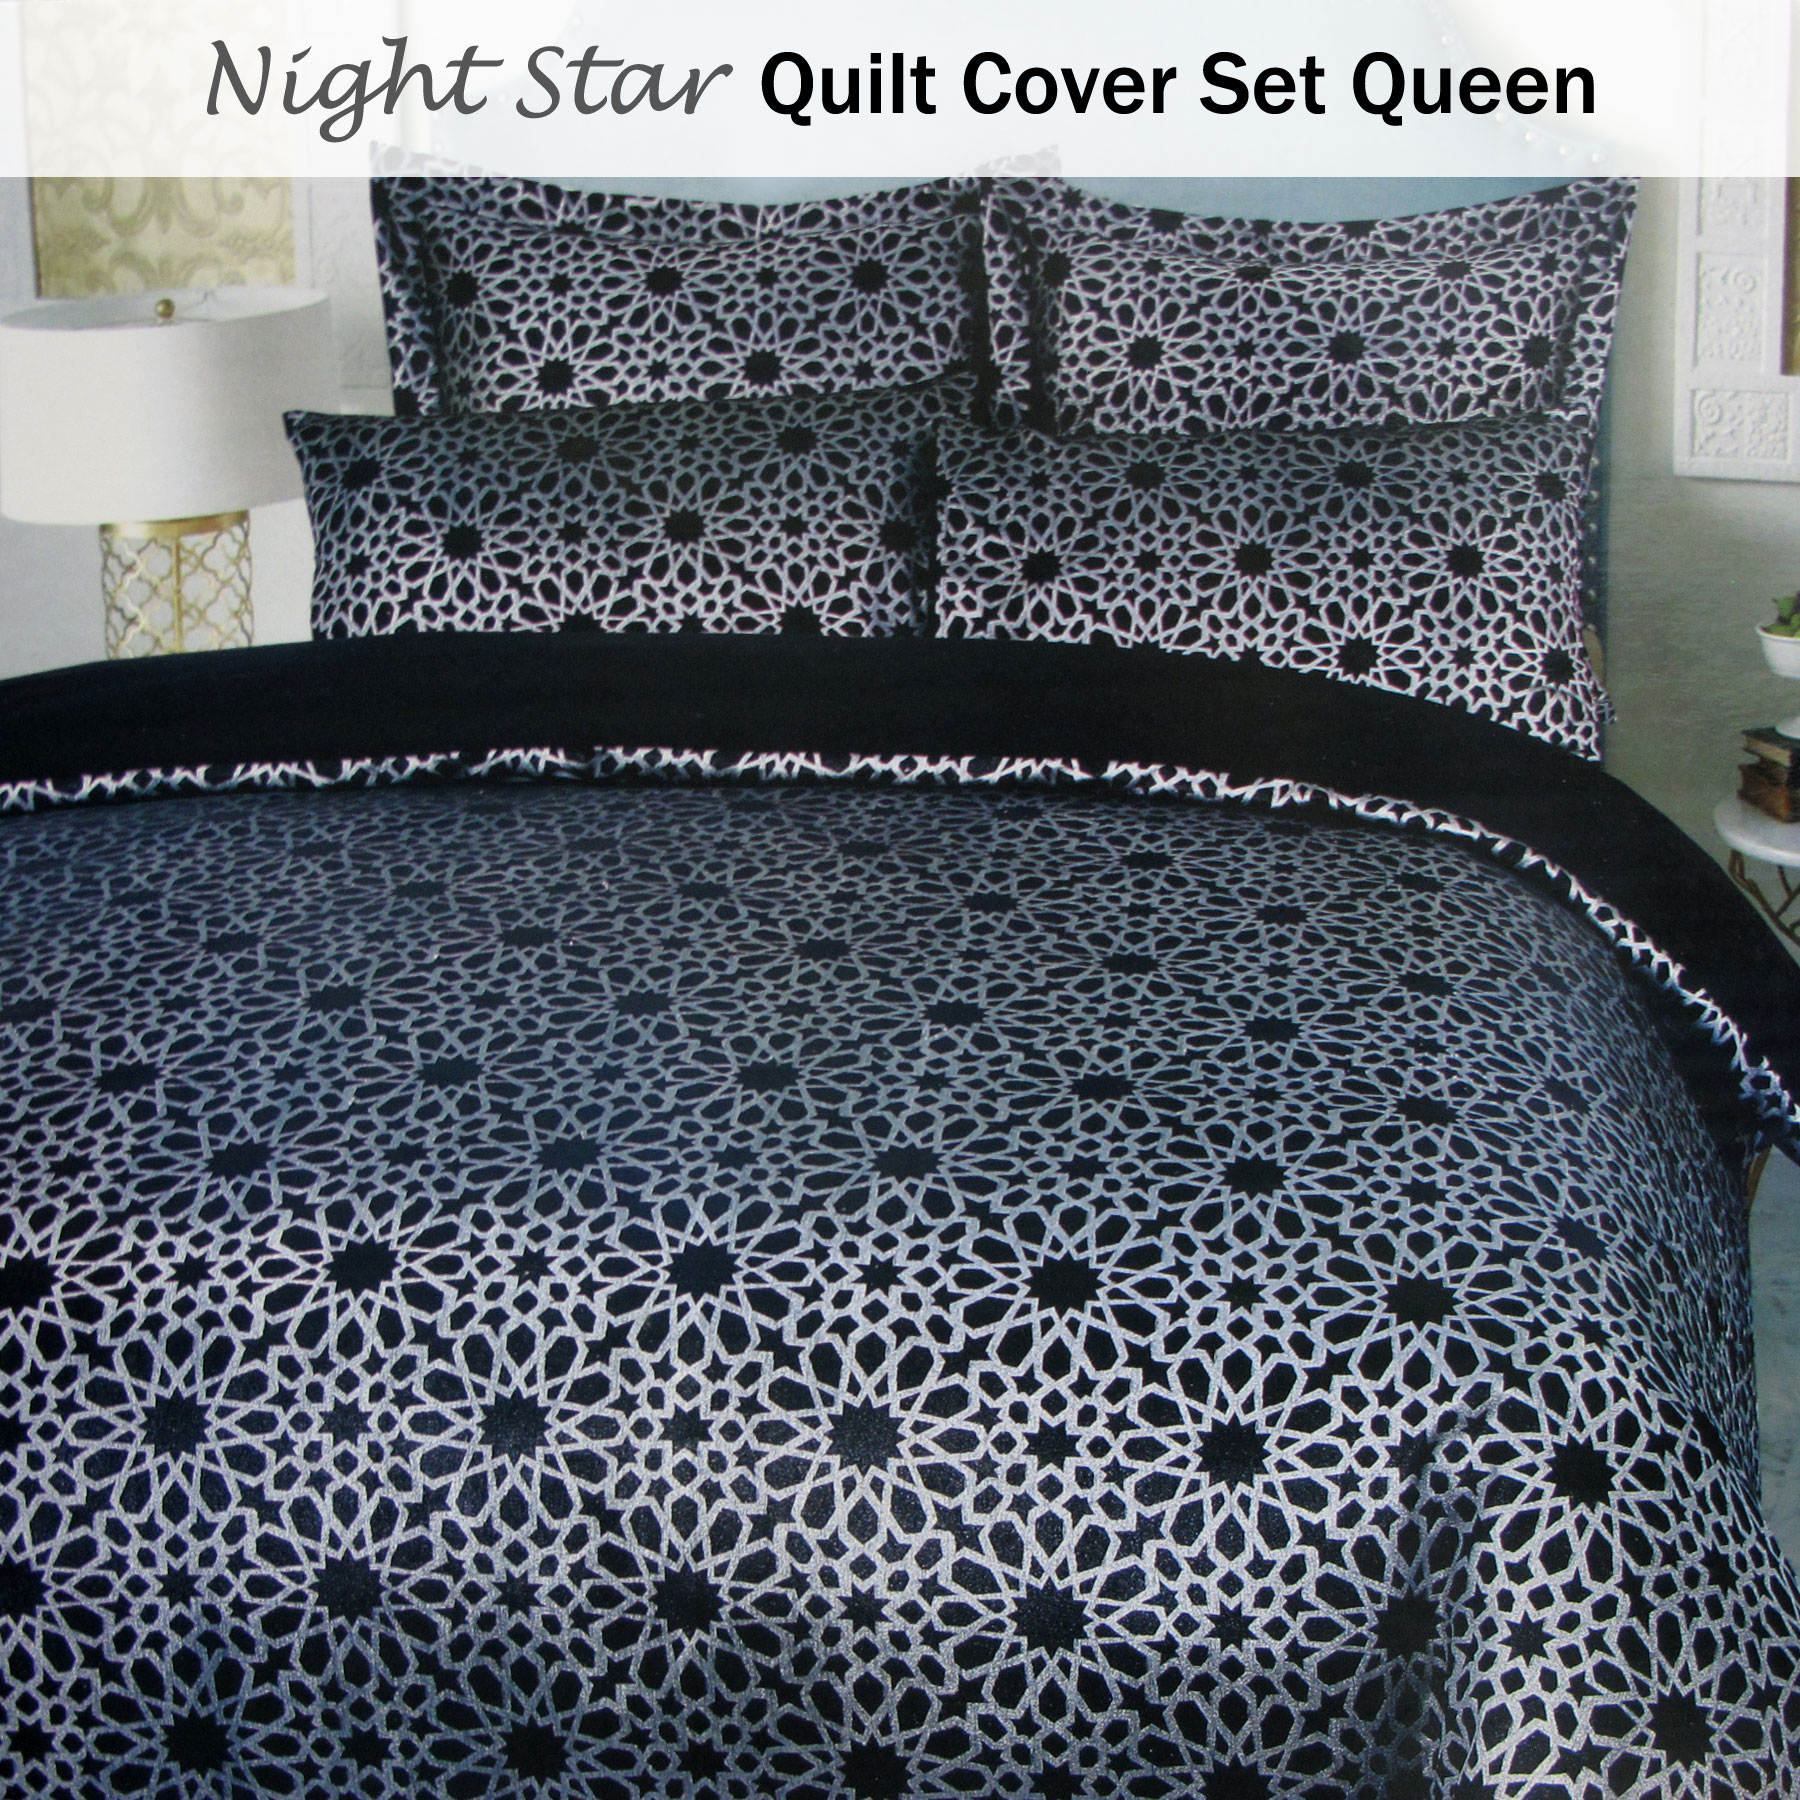 3 Pce Night Star Black Silver Quilt Cover Set Queen